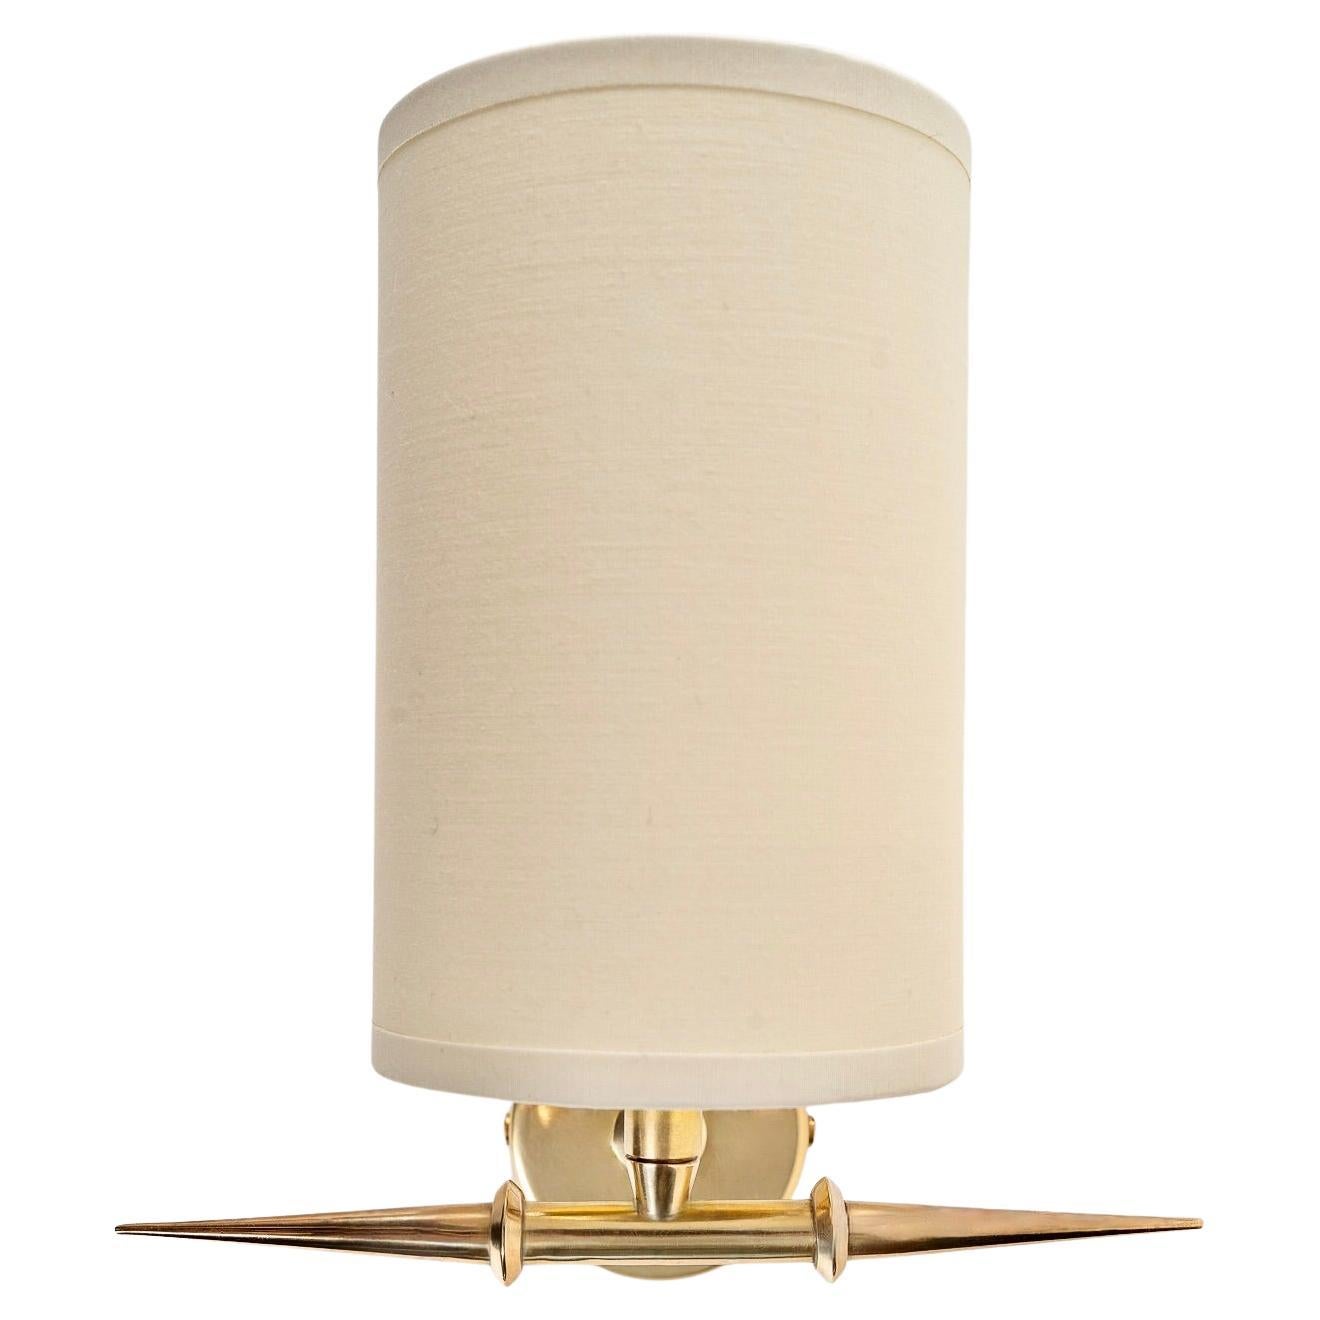 Composed of a round wall support in gilded brass on which rests a small rod in gilded brass serving as a support for the shade of off-white color of trapezoidal form.
The sconces are underlined at the base by a junction placed horizontally in